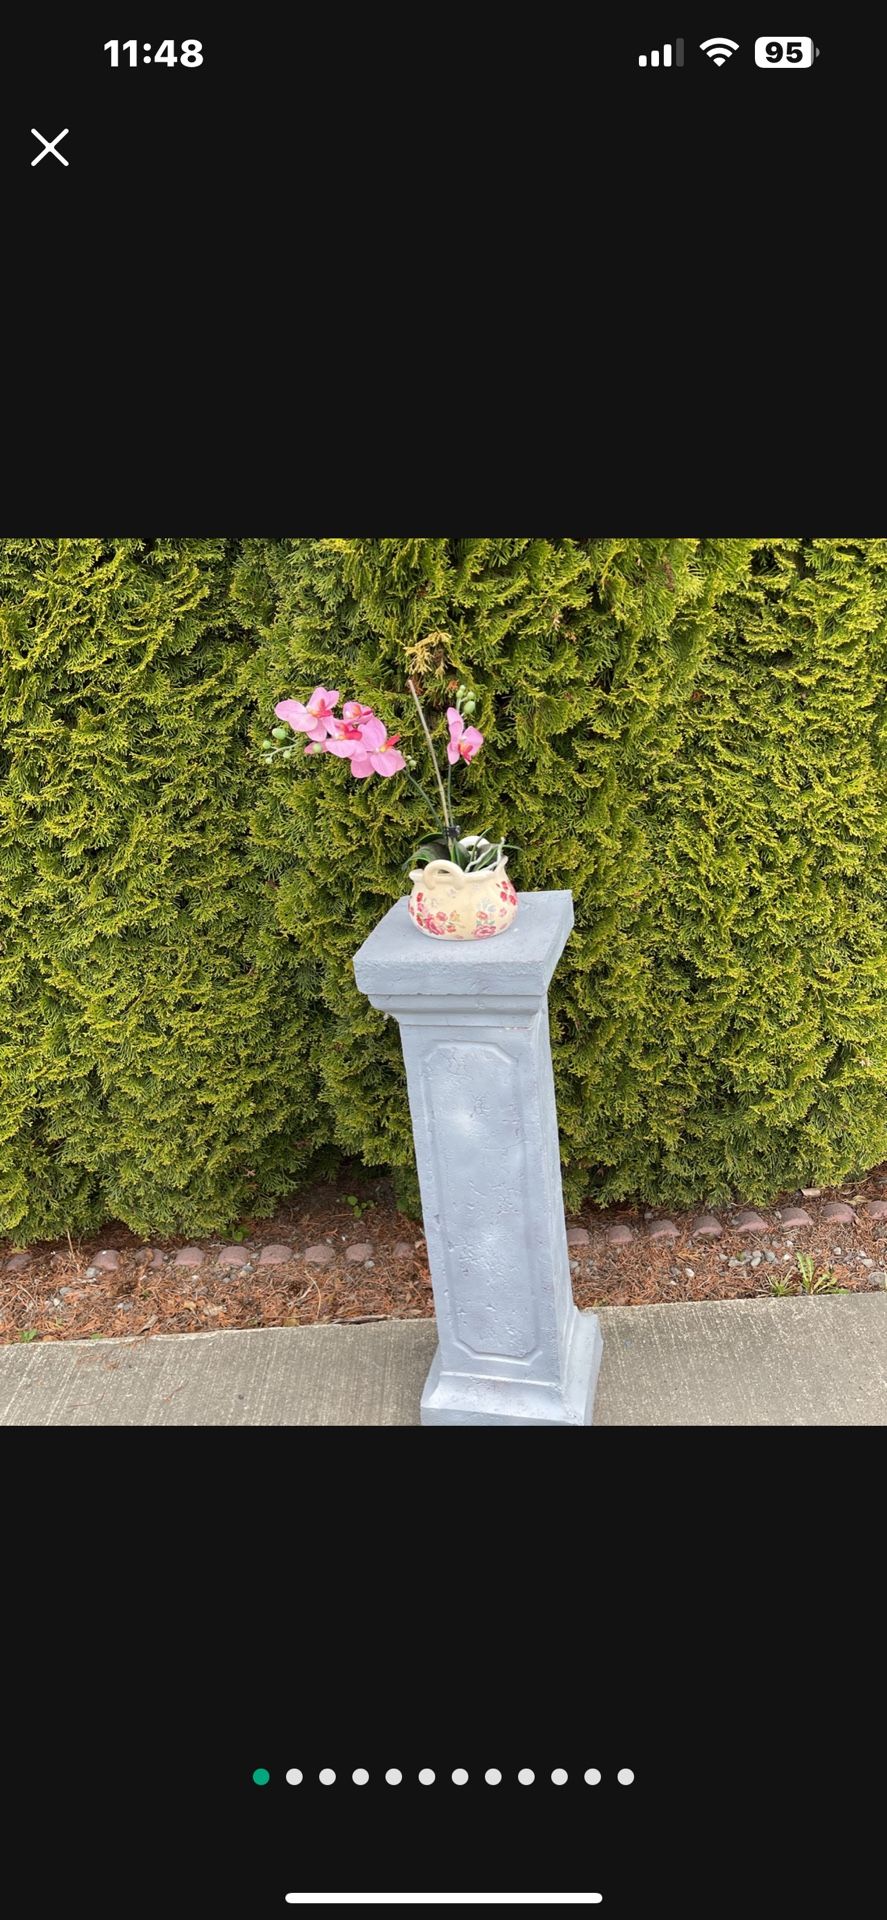 Pedestal With Or Without Flowers Is Not Heavy 12X12” And 36” Tall